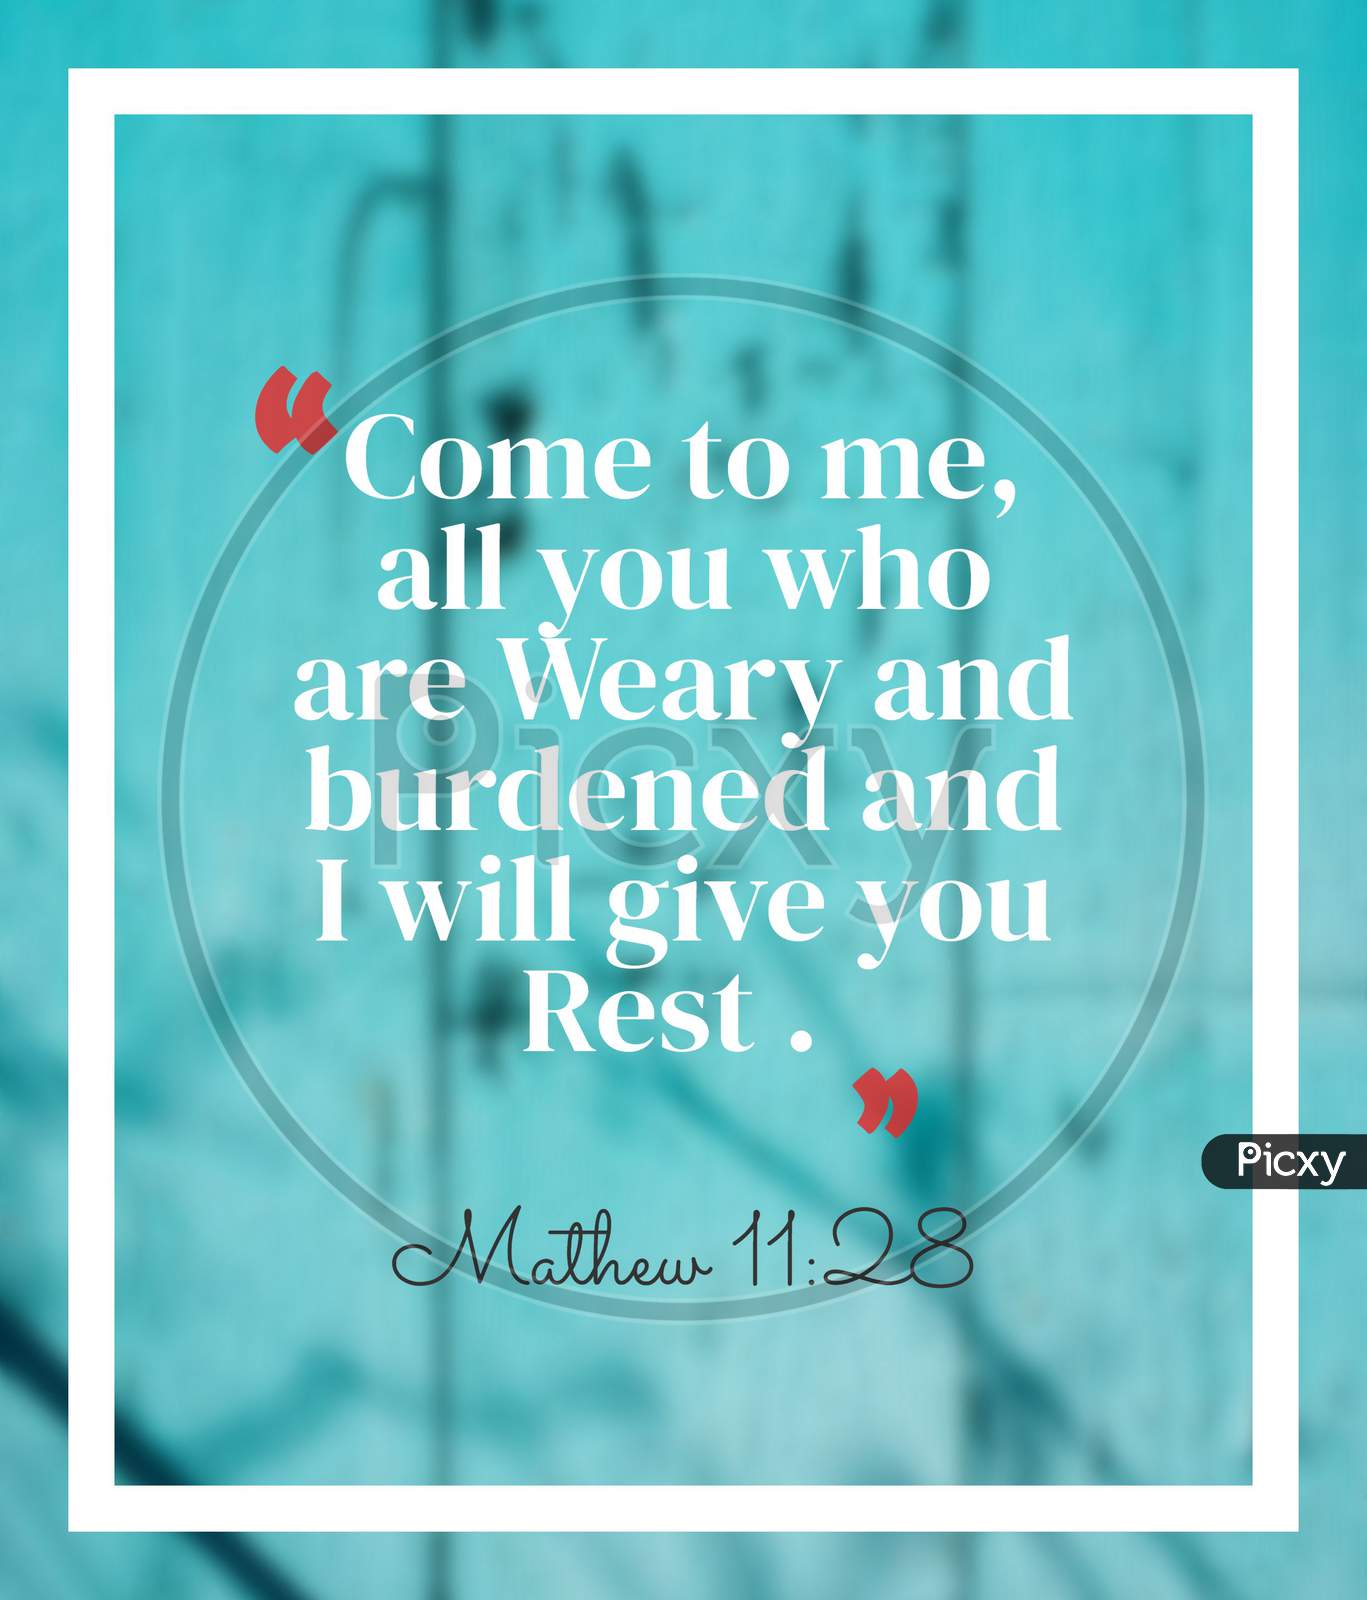 Bible Words  Mathew 11:28 " Come To  Me All You Who Are Weary And Burdened And I Will Give You Rest "